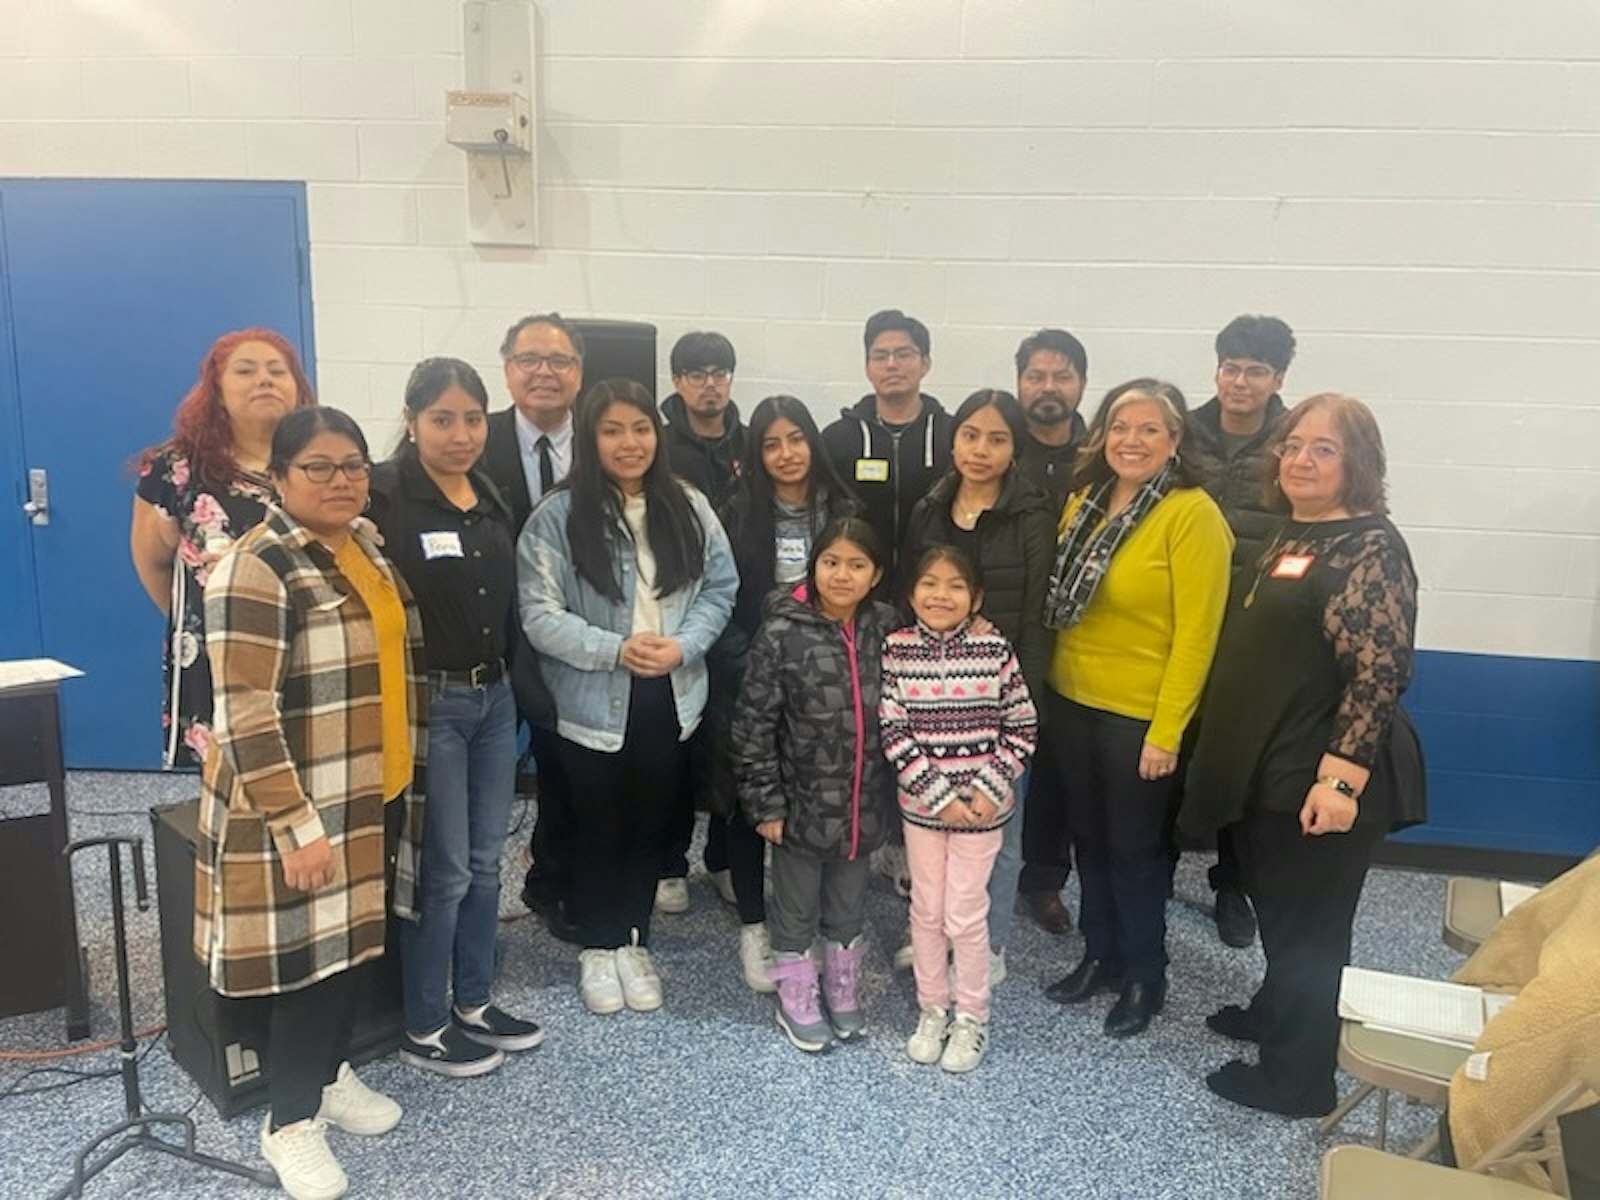 The Durán family is pictured with Rubí Martínez (first right) and Venus Hernández (first left), who is the new choir director at St. Gabriel Church. All attended the Archdiocese of Detroit's first workshop for Hispanic musicians (Photo courtesy of Brenda Hascall)